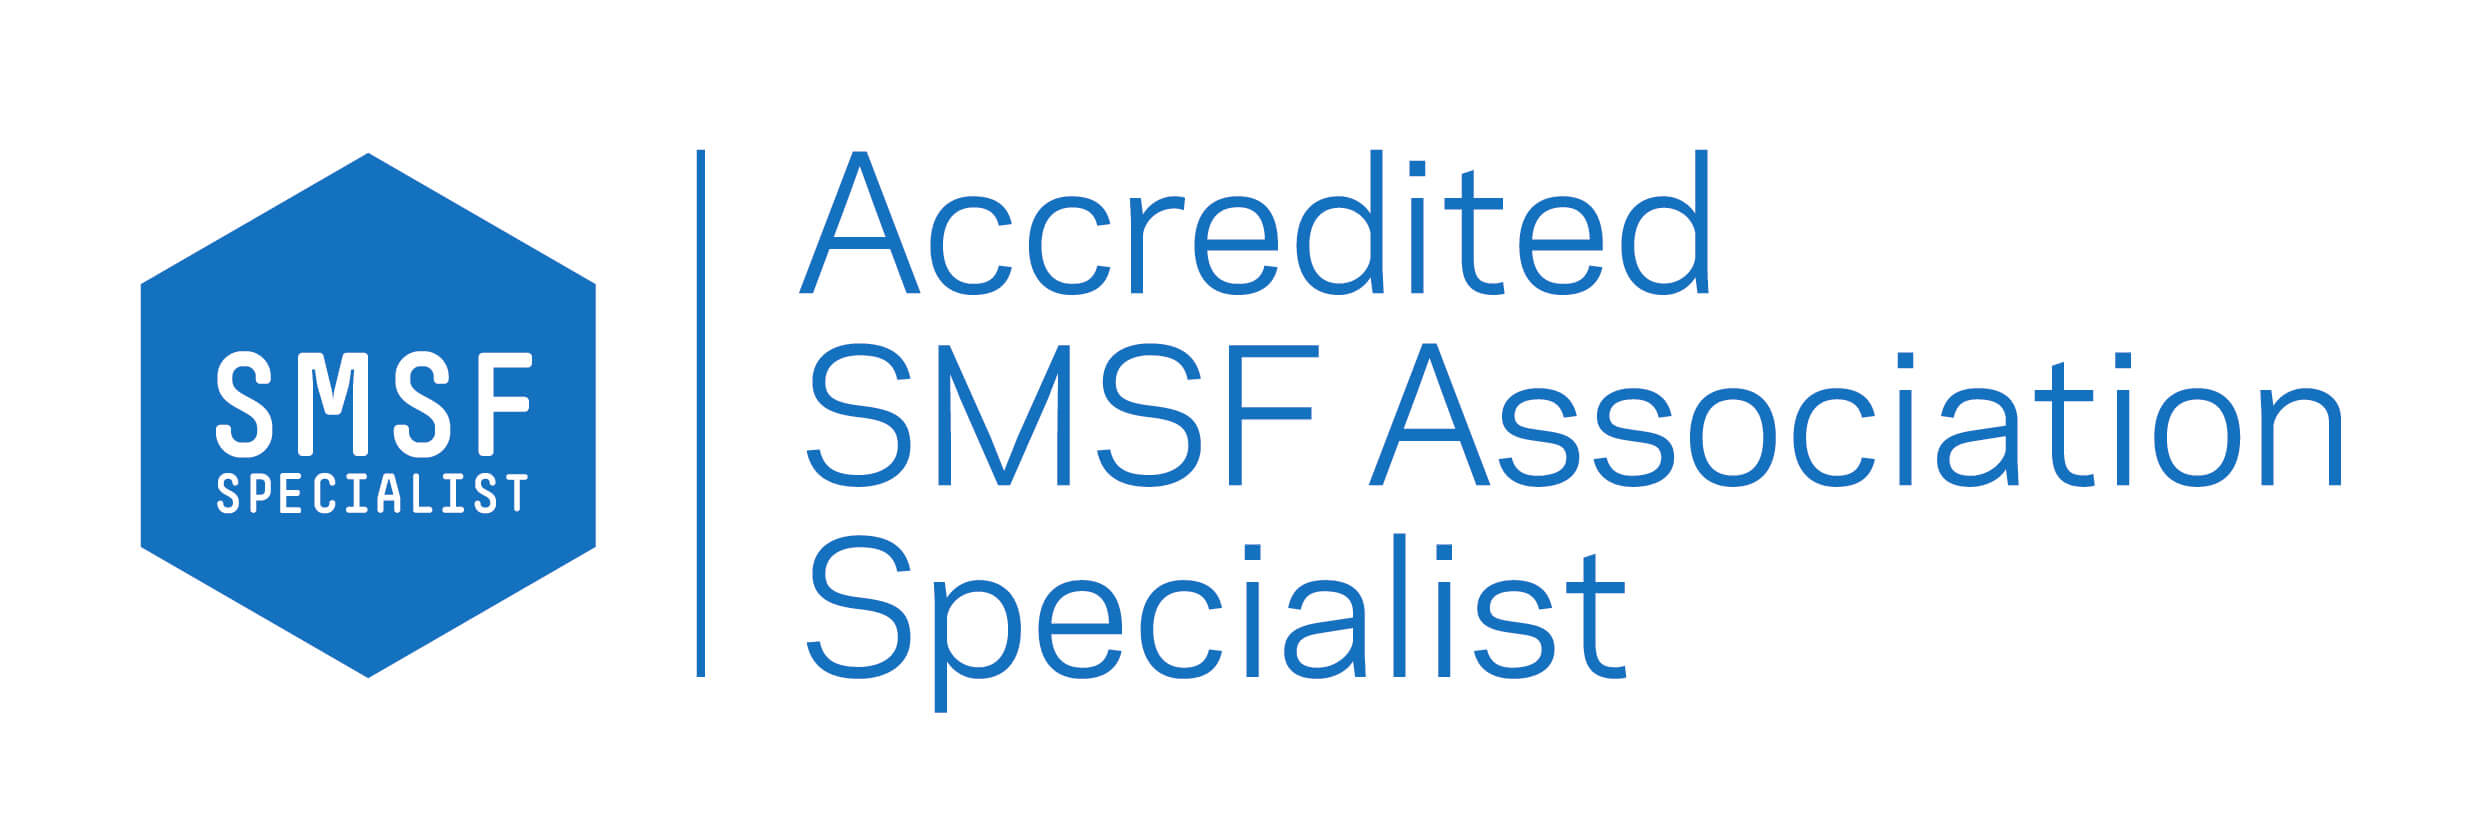 SMSFAccreditedSMSFAssociationSpecialist Simply SMSF Audits | Fast and Affordable SMSF Audits